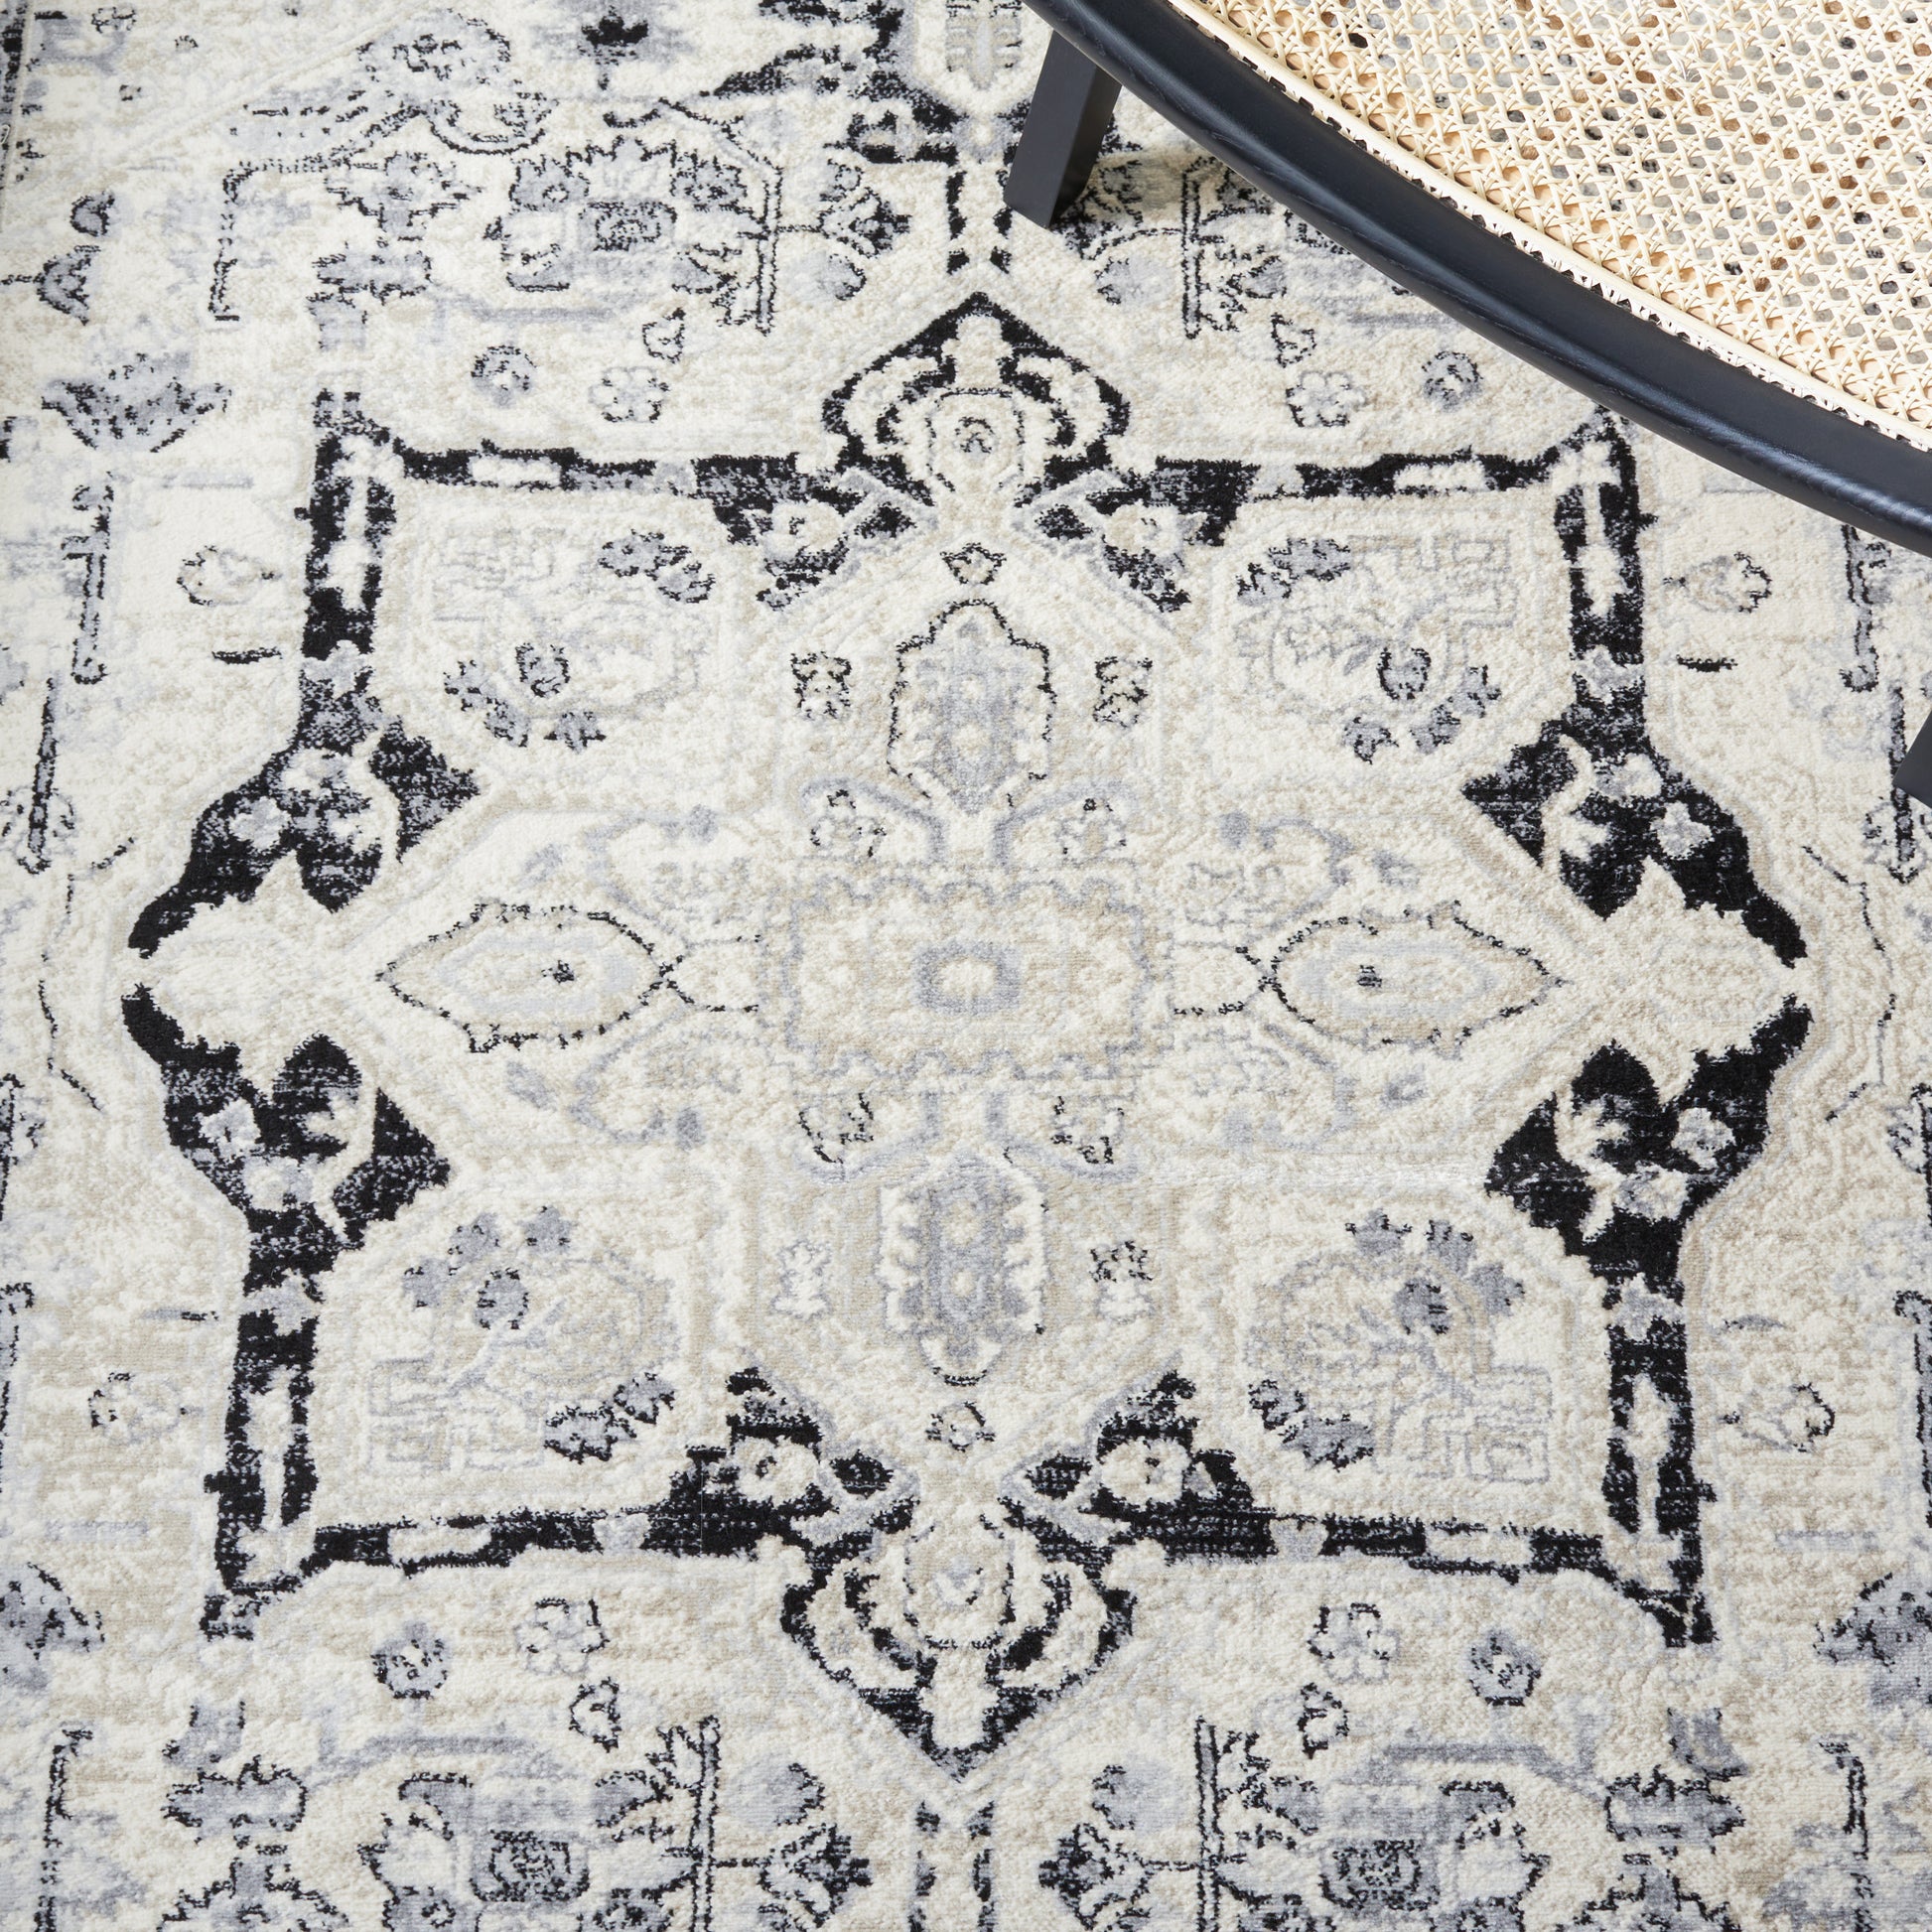 Safavieh Brentwood Bnt852A Ivory/Black Area Rug